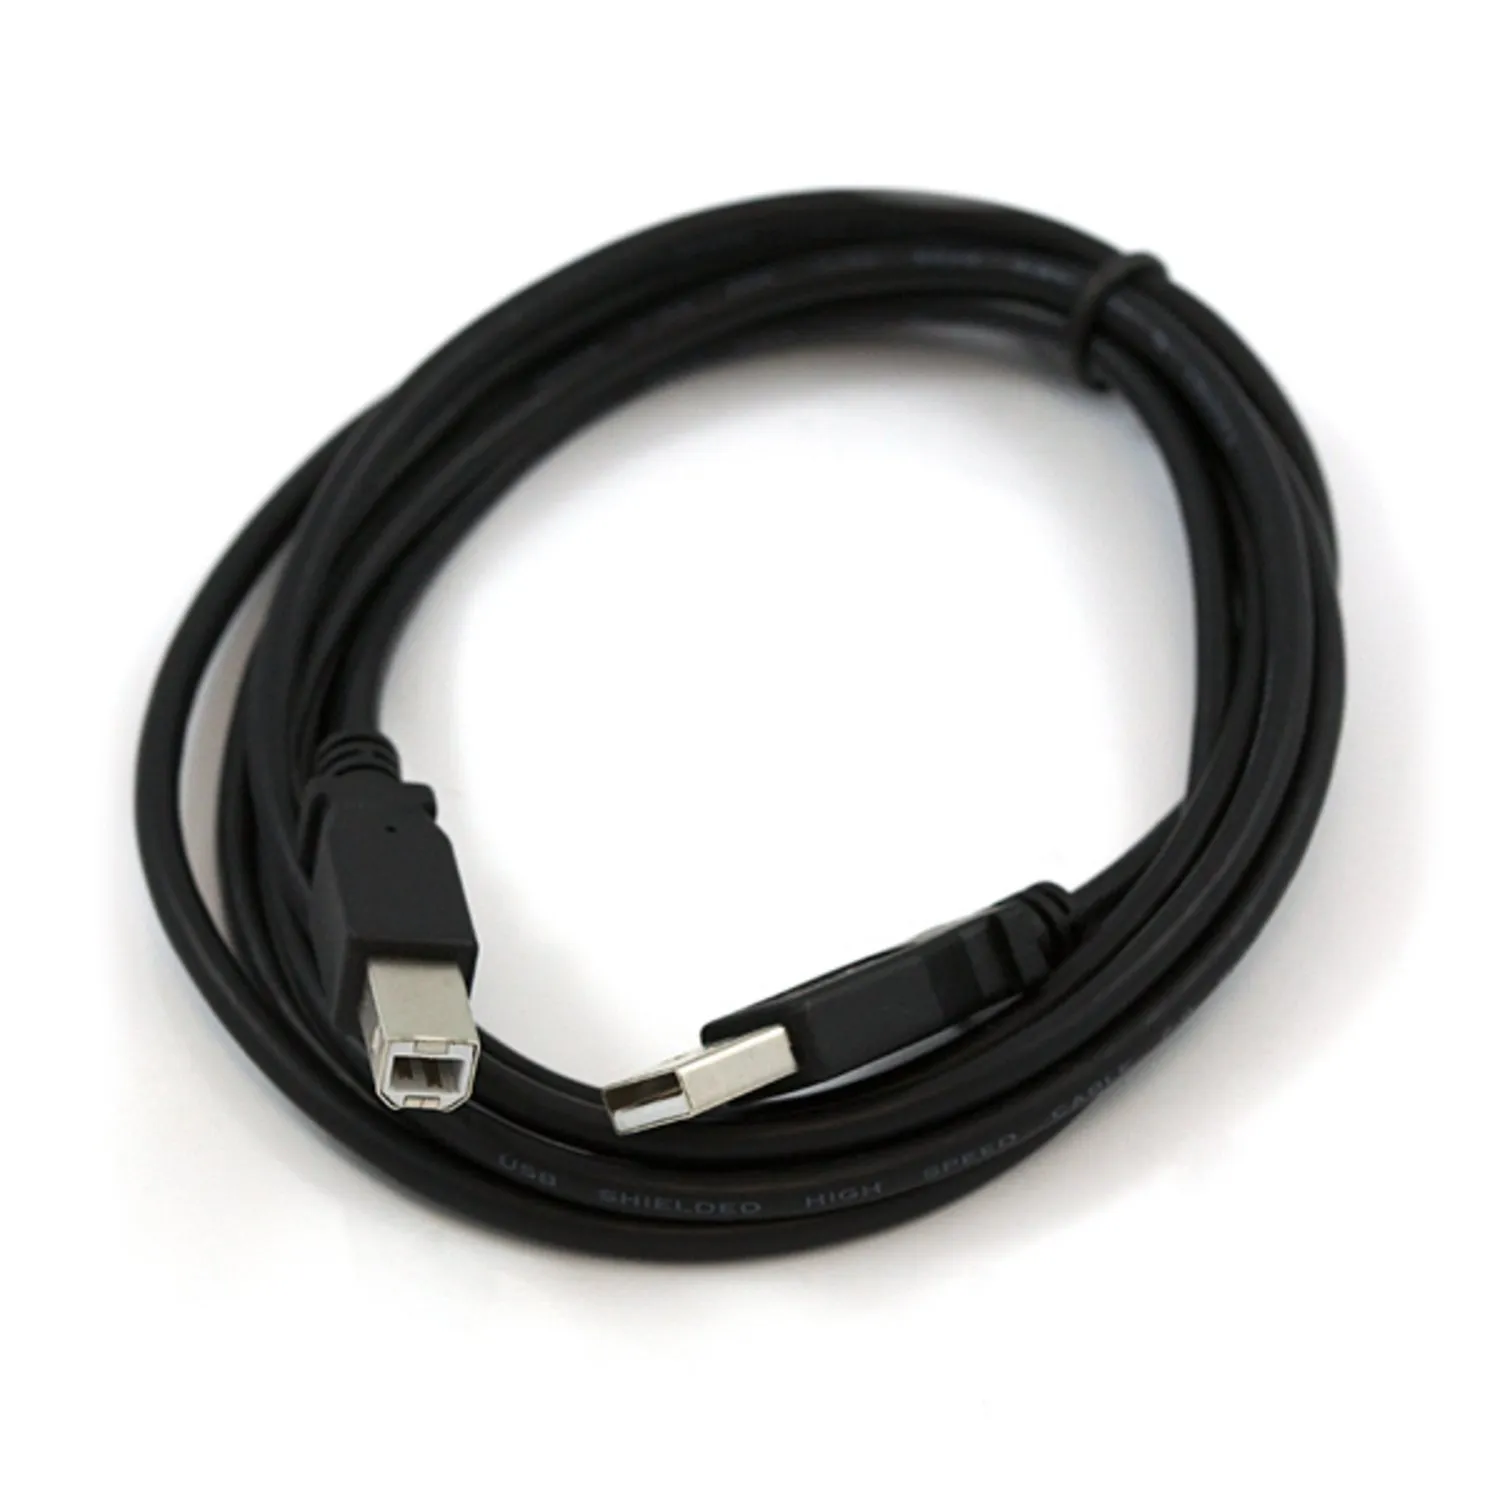 Photo of USB Cable A to B - 6 Foot